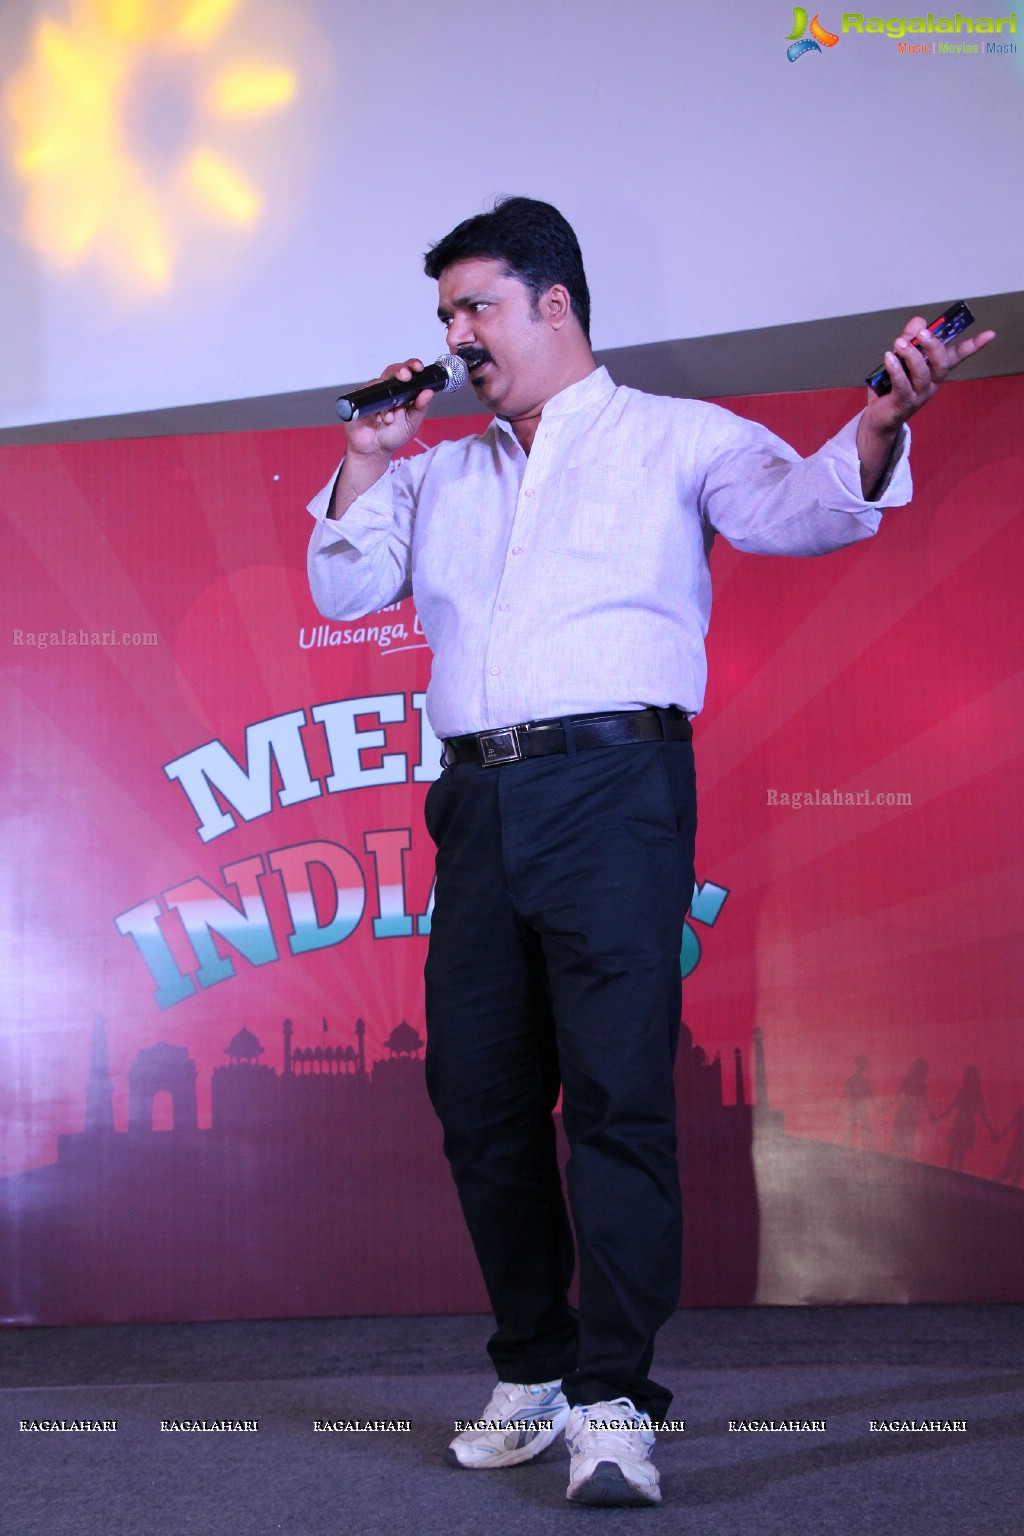 Meme Indians Event by 93.5 RED FM at Inorbit Mall